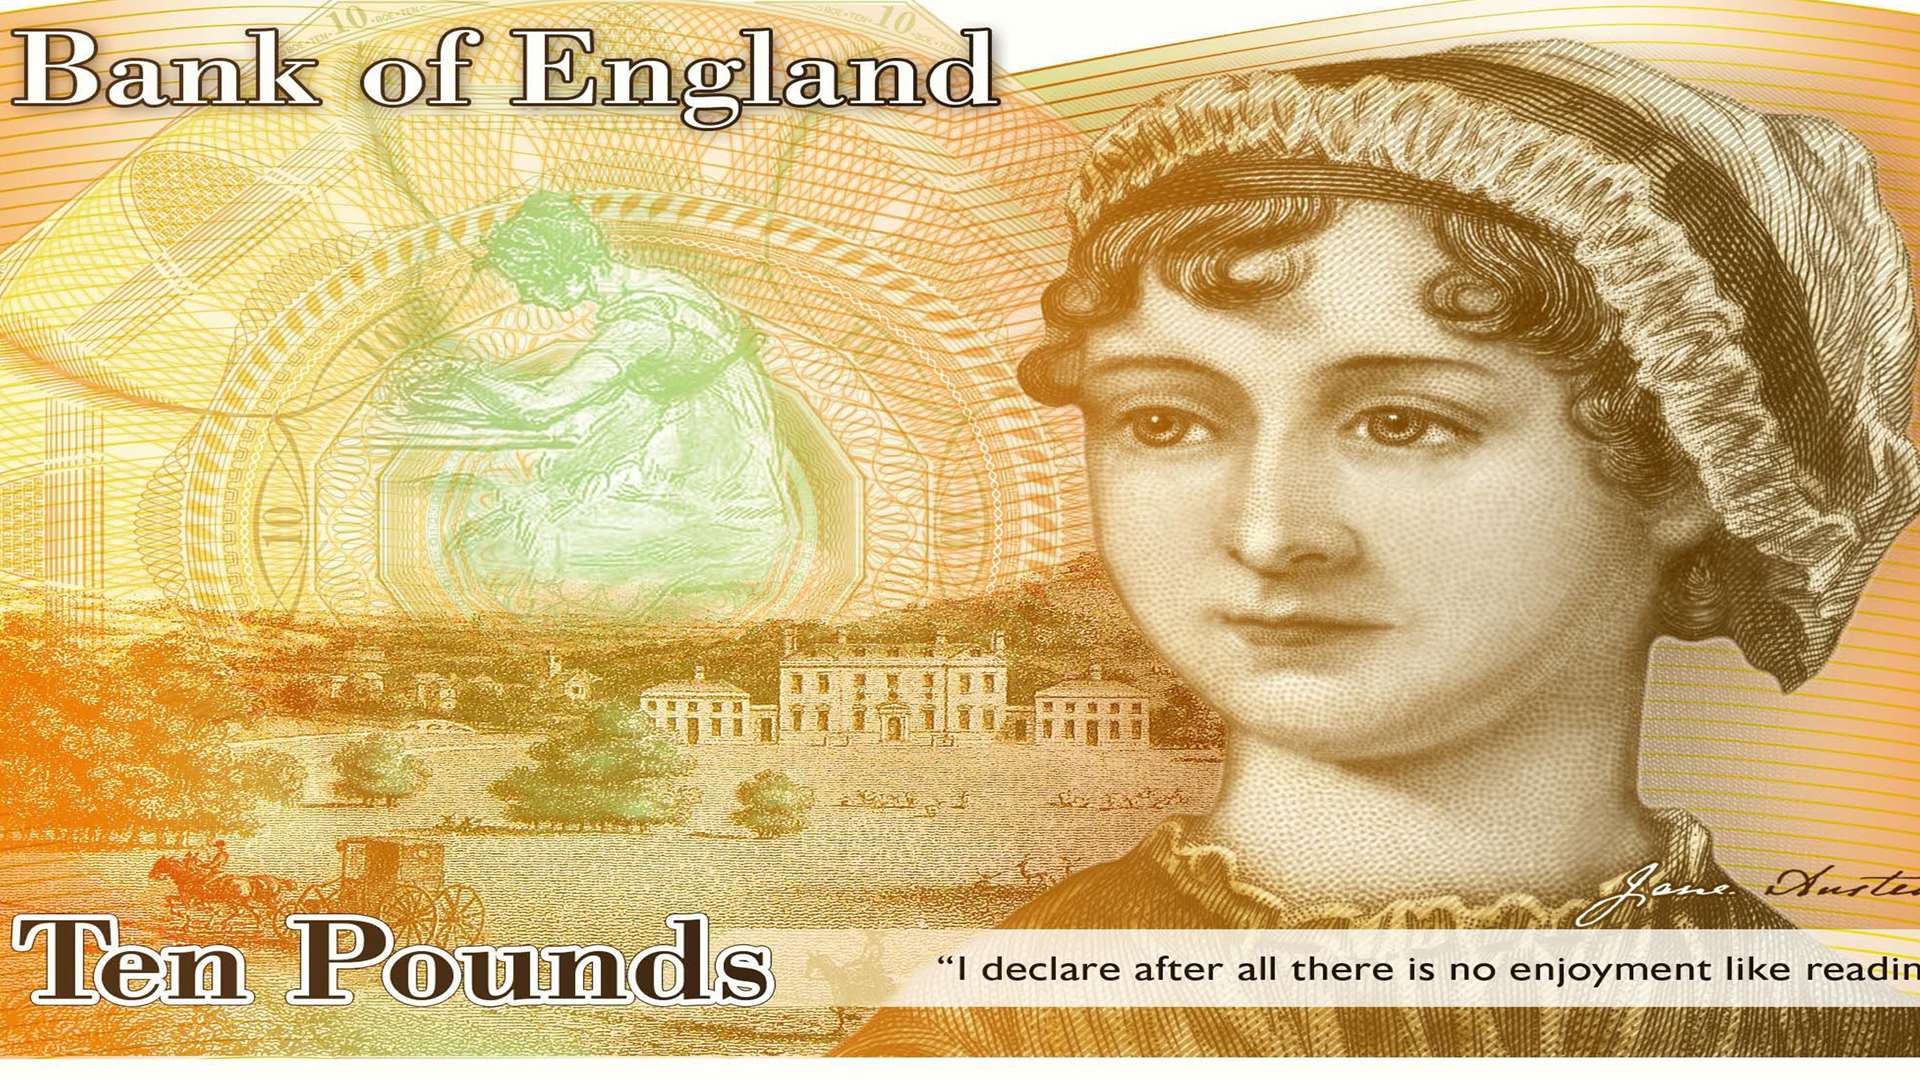 Jane Austen features on the new £10